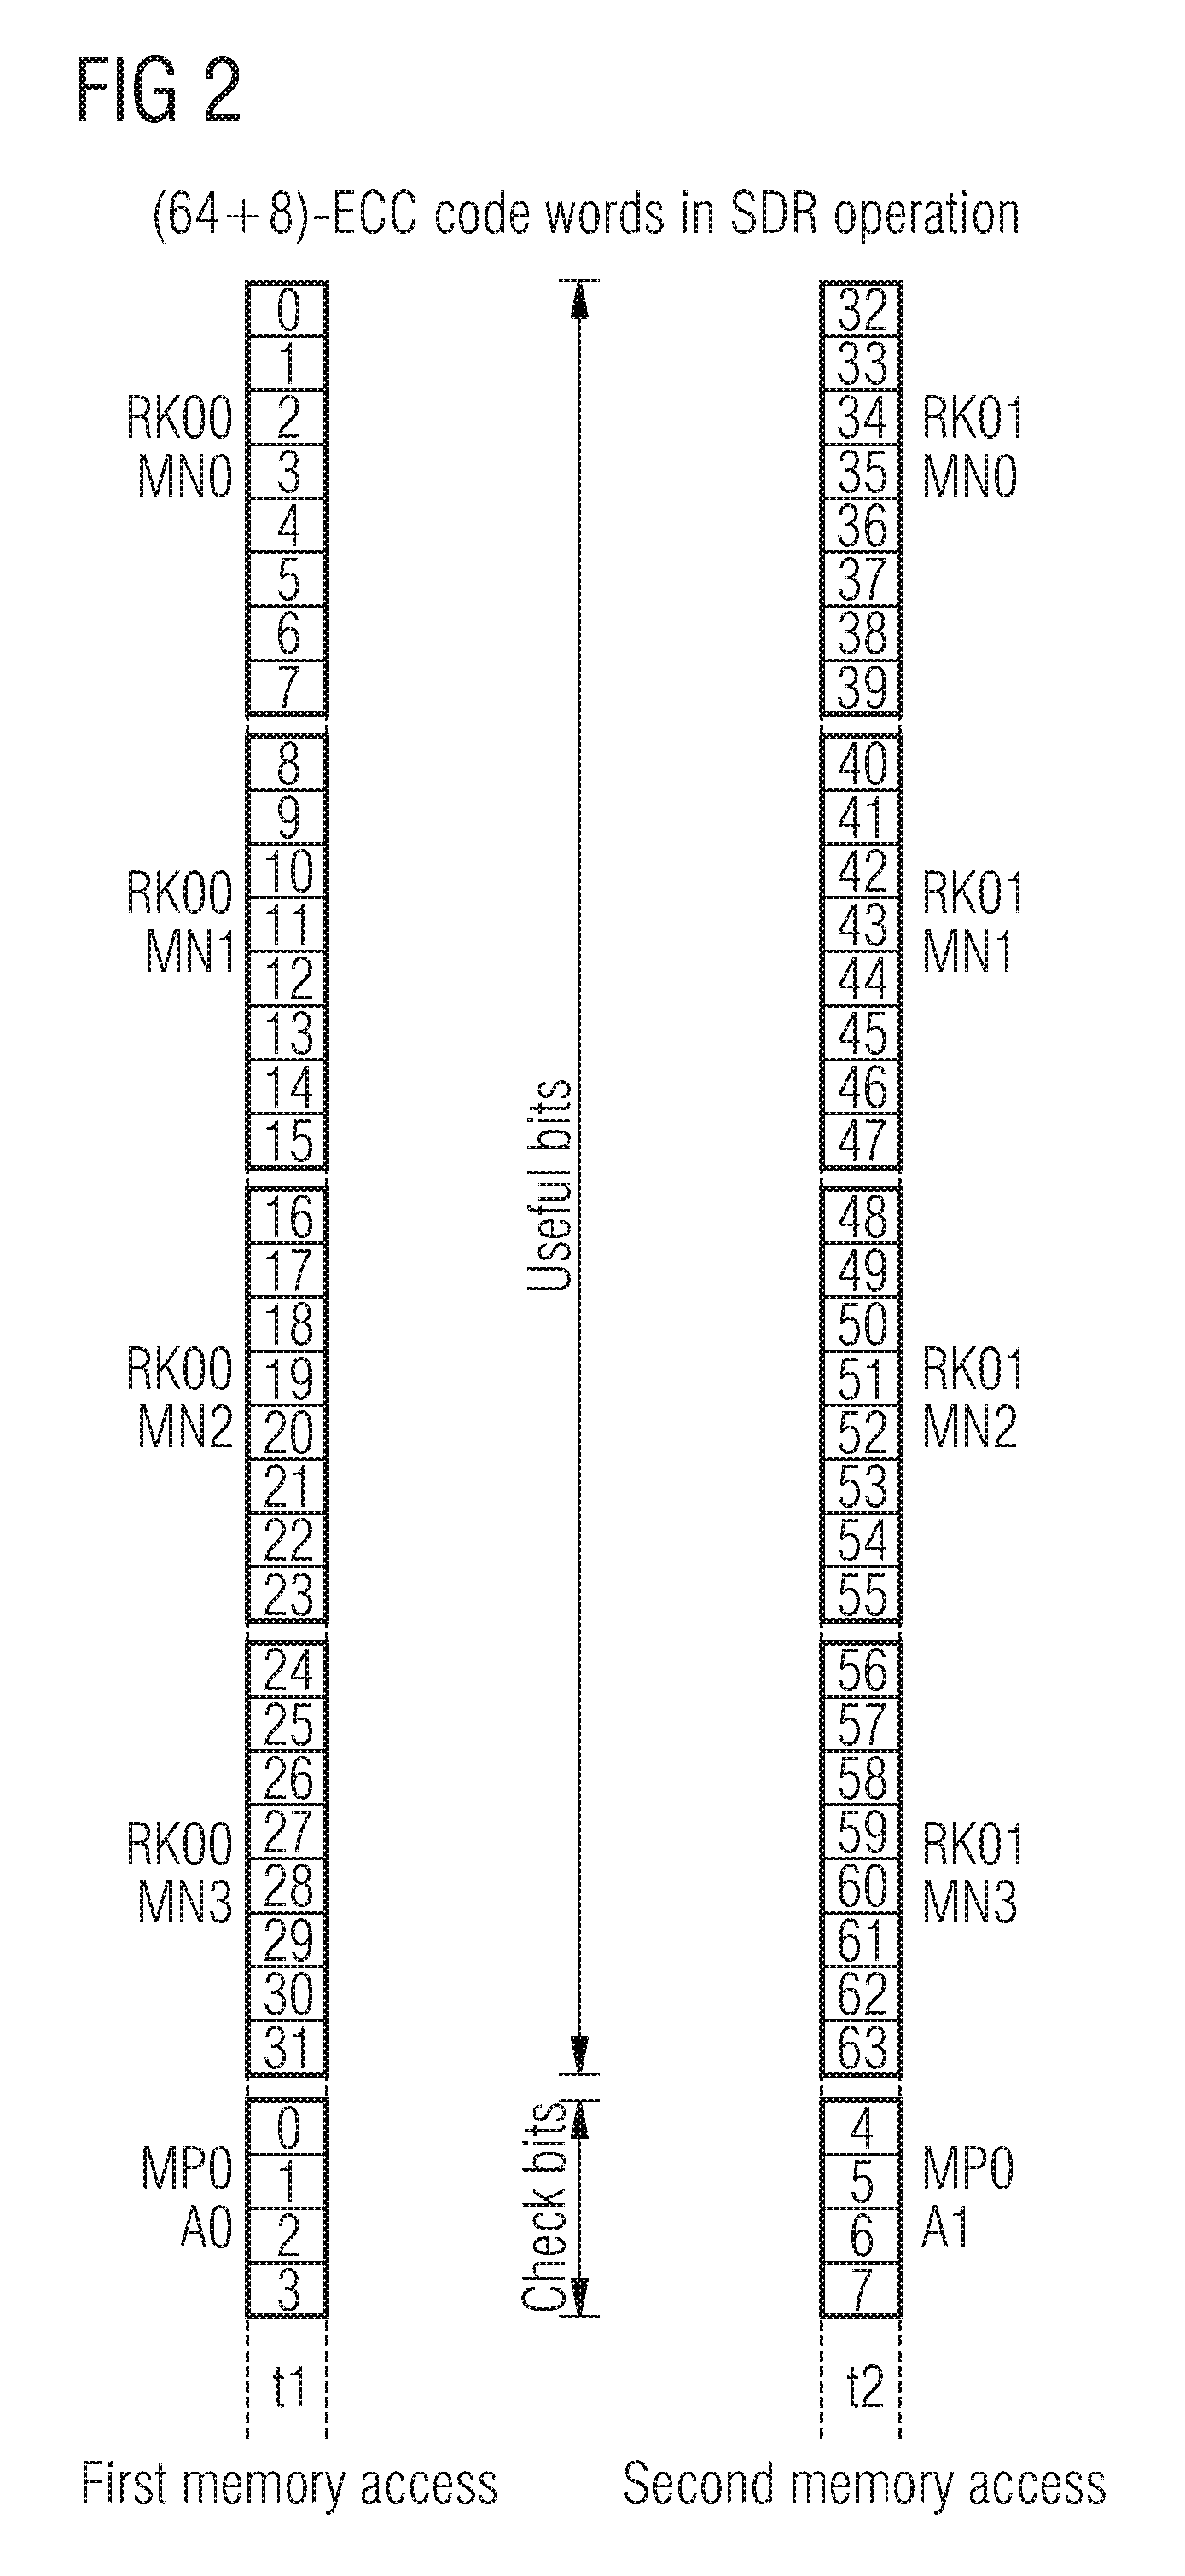 Memory module comprising a plurality of memory devices